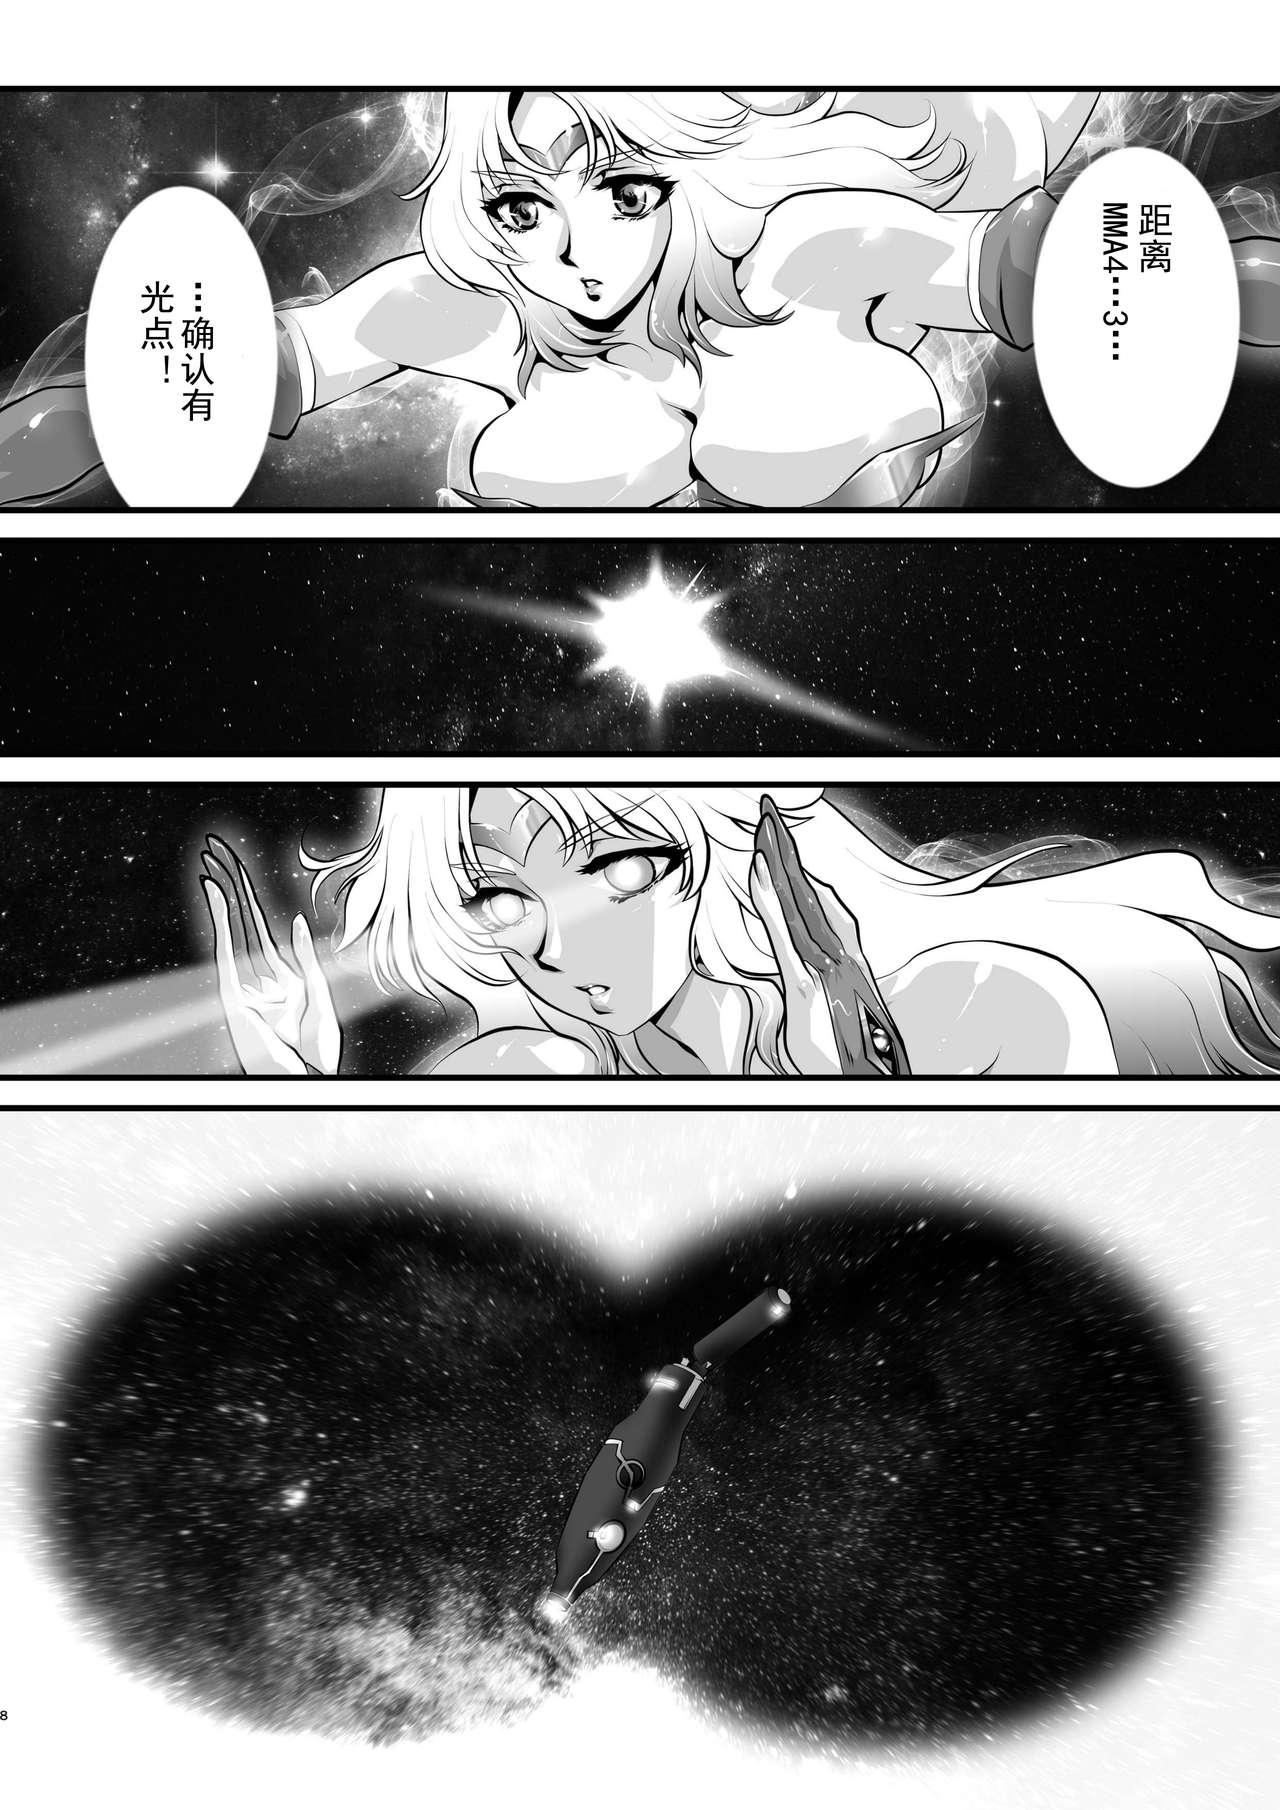 Handsome LUVLADY Encounter with jewel - Ultraman Argentina - Page 8